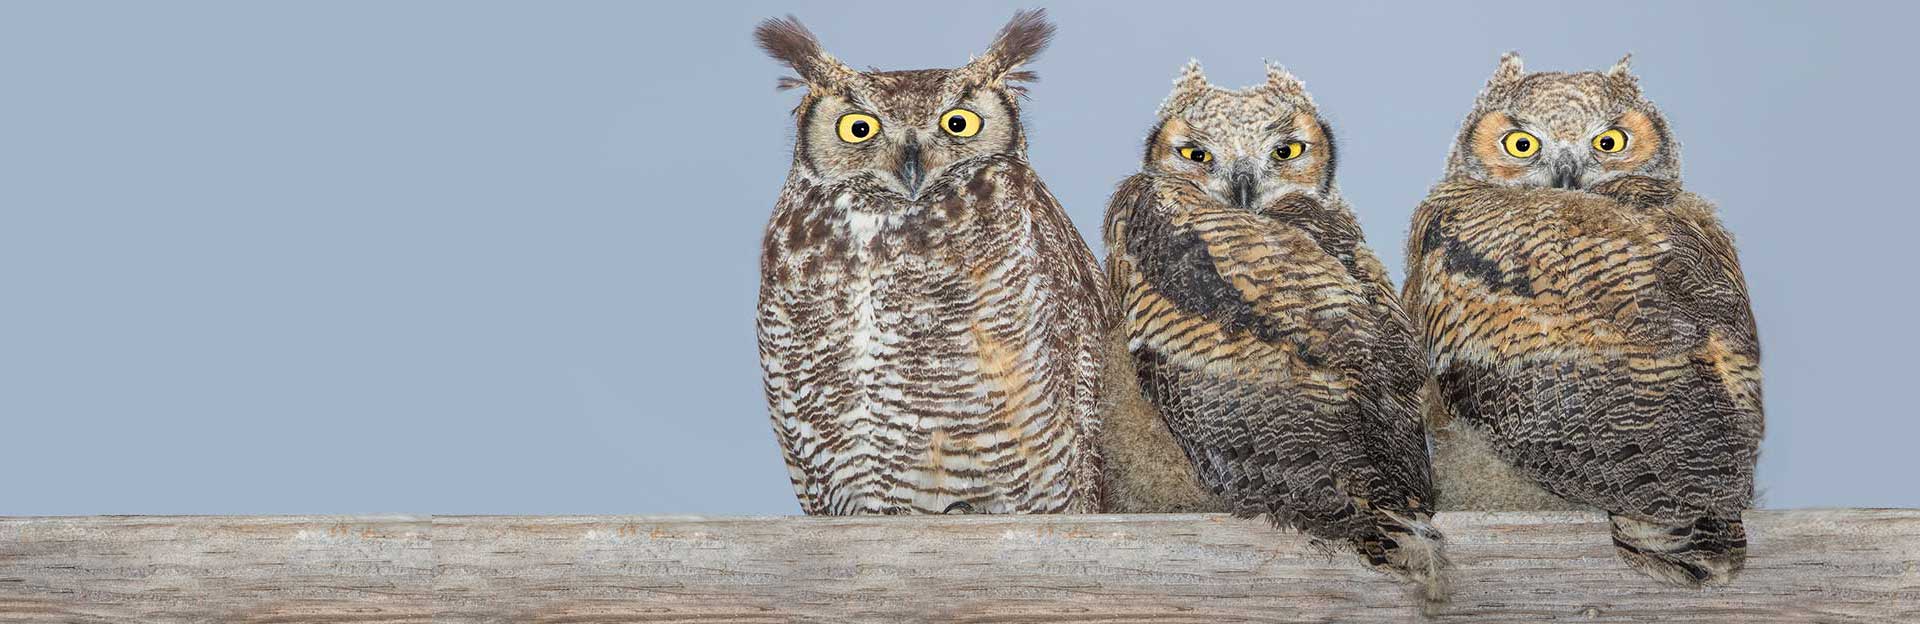 Great horned owl and chicks (c) Chappell